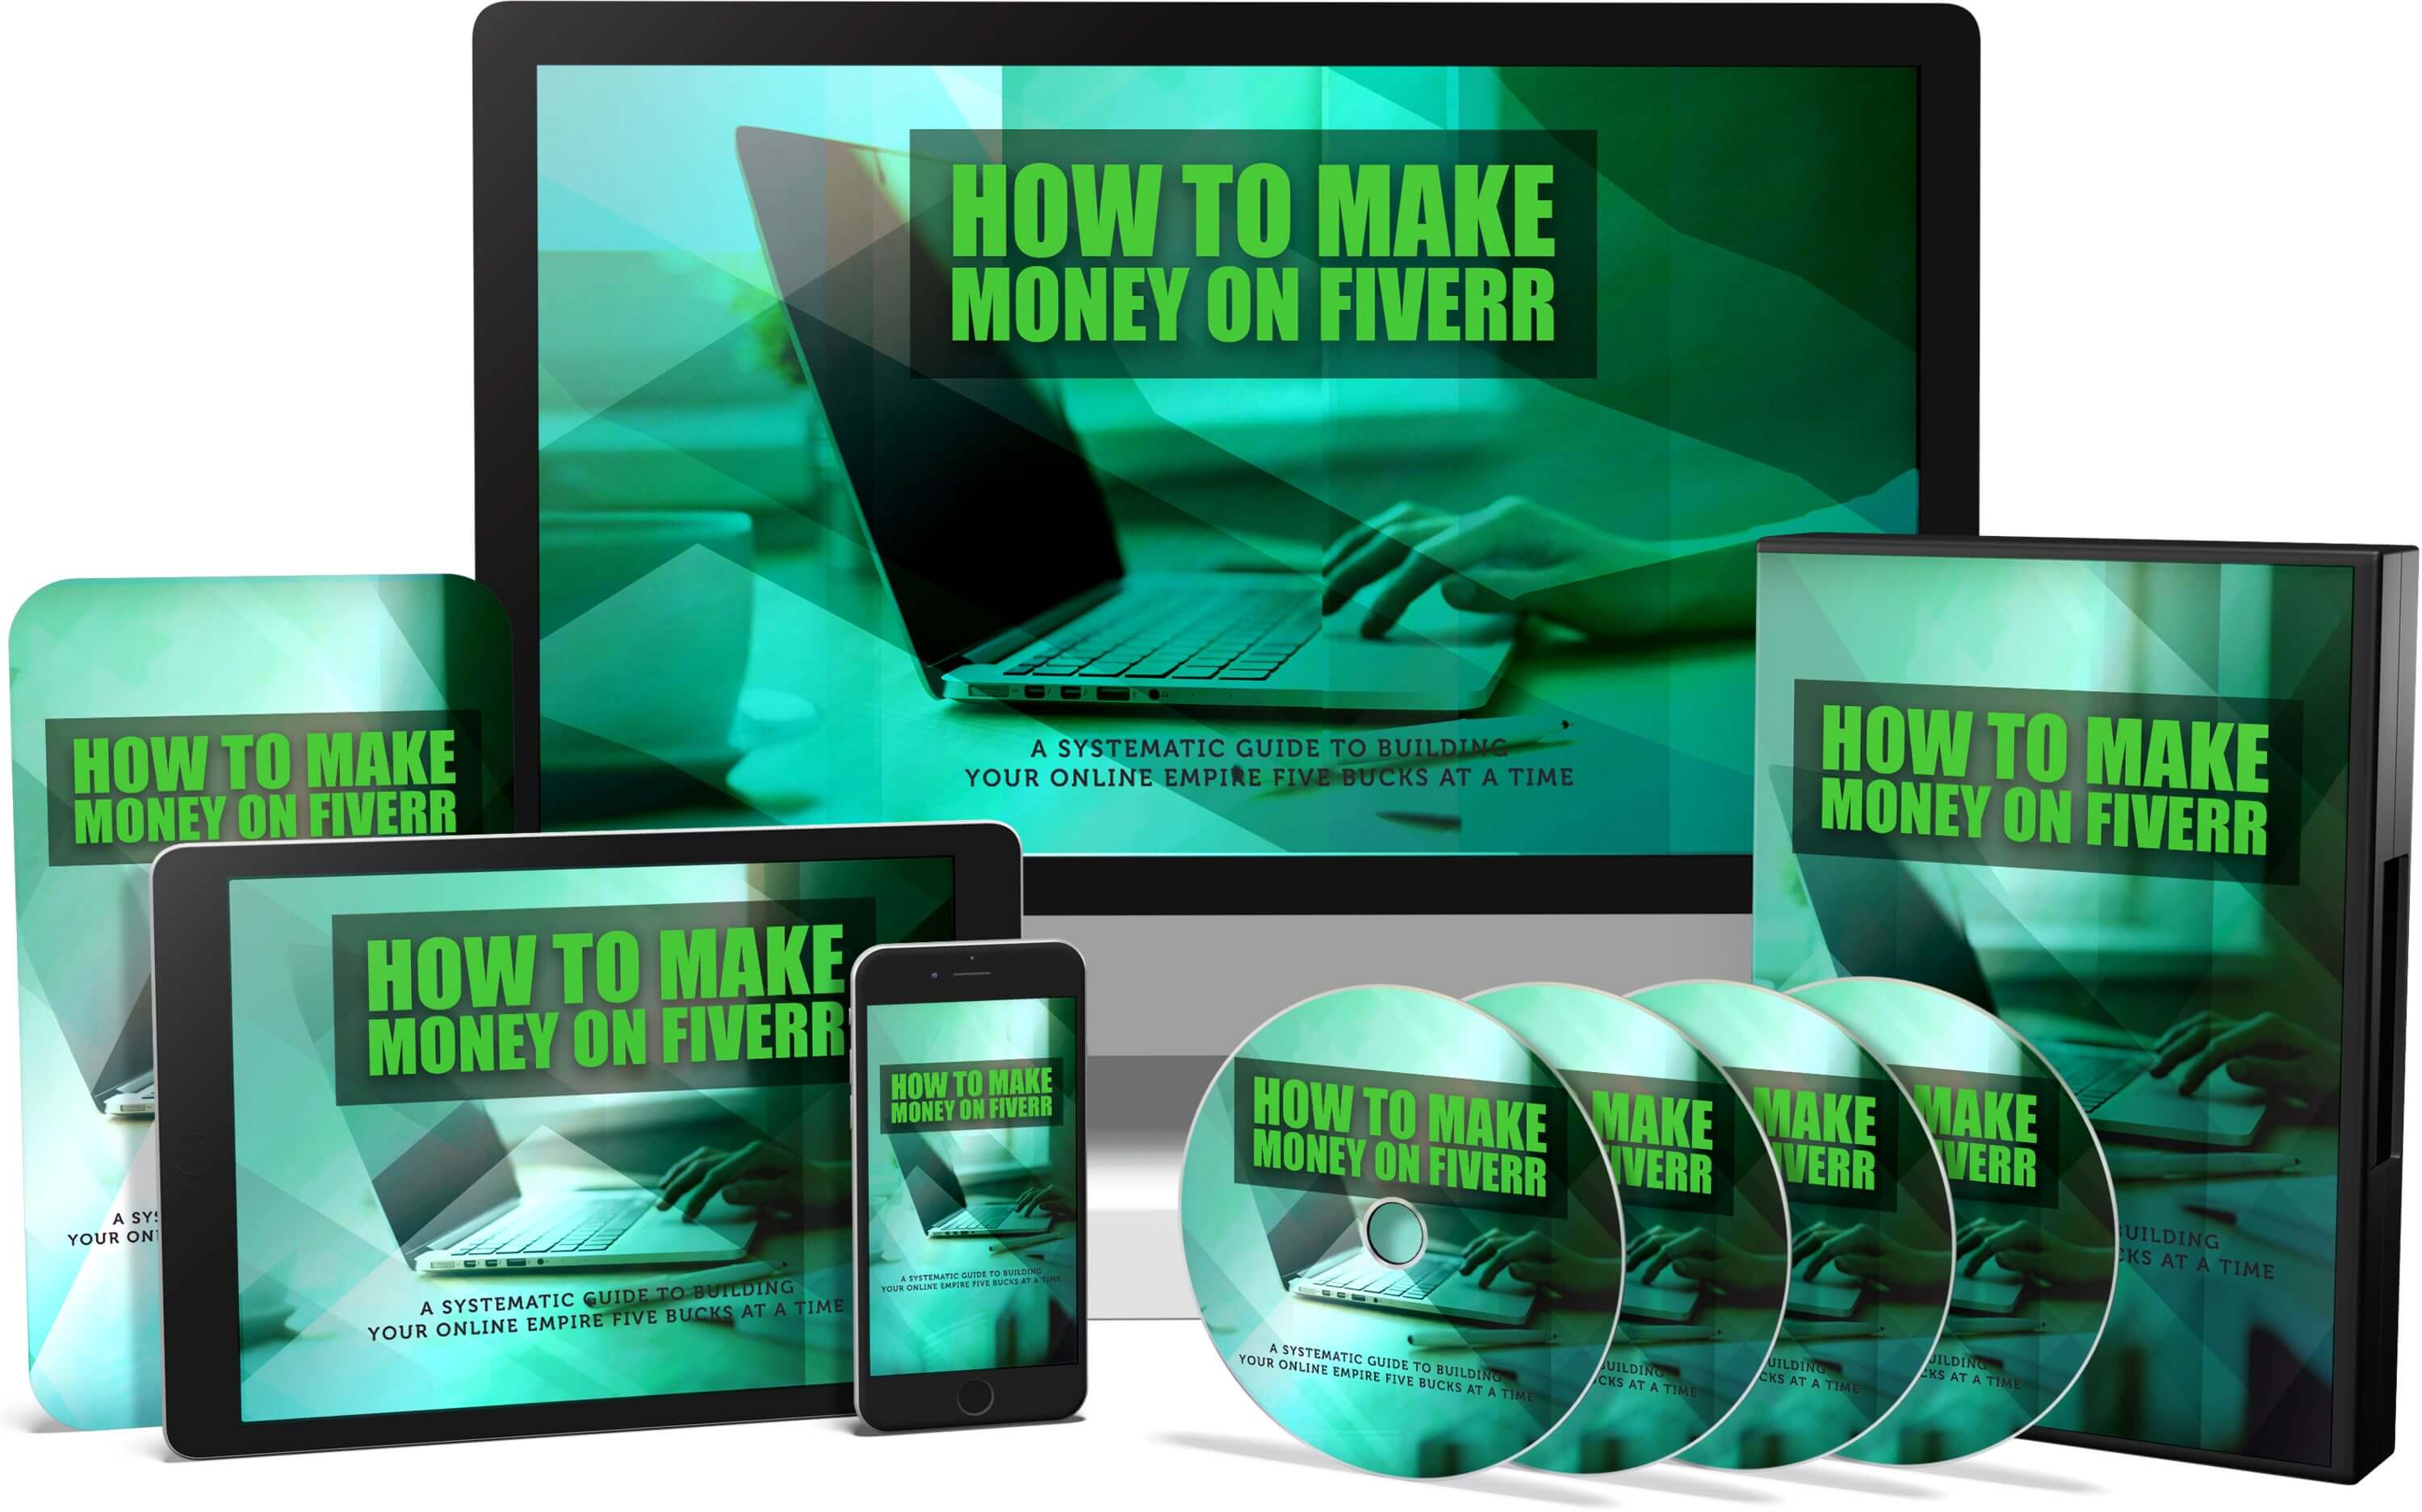 Plr How To Make Money On Fiverr Review Best Review Huge Bonus - how to make money on fiverr review